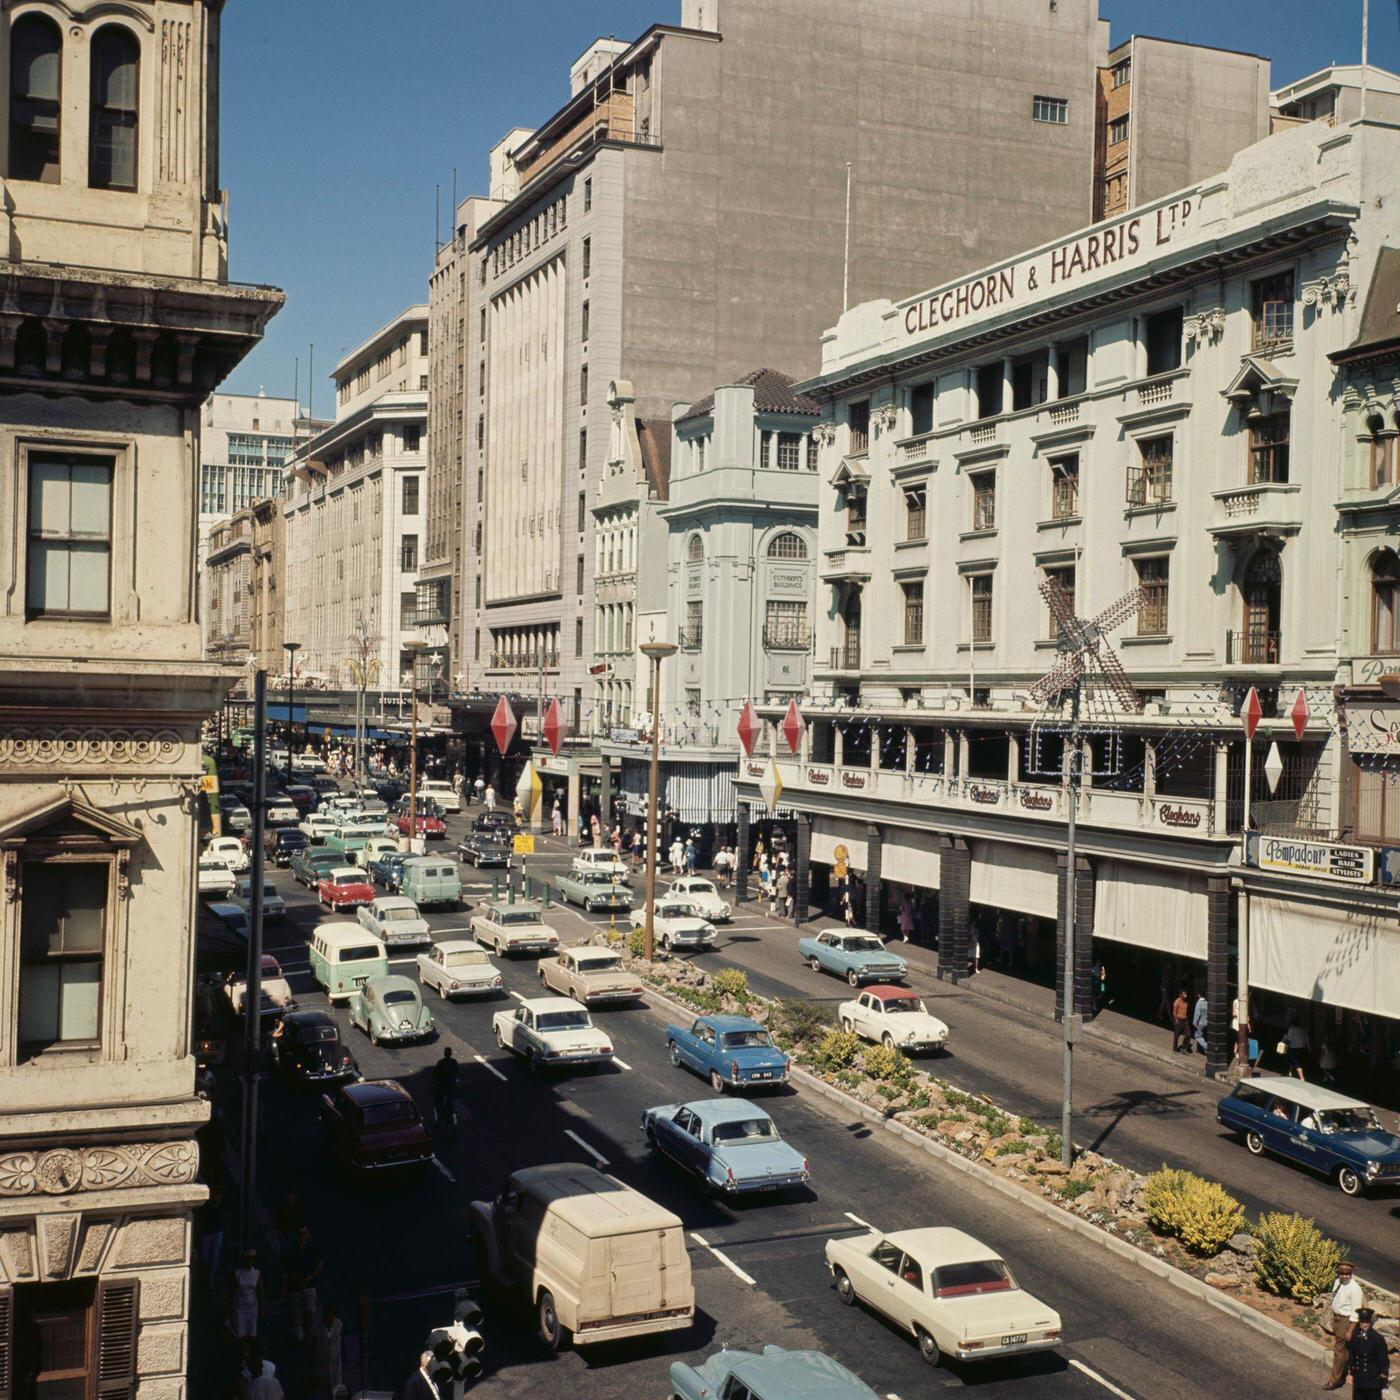 Pedestrians and traffic pass the Cleghorn & Harris department store on Adderley Street in the centre of the city of Cape Town, 1966